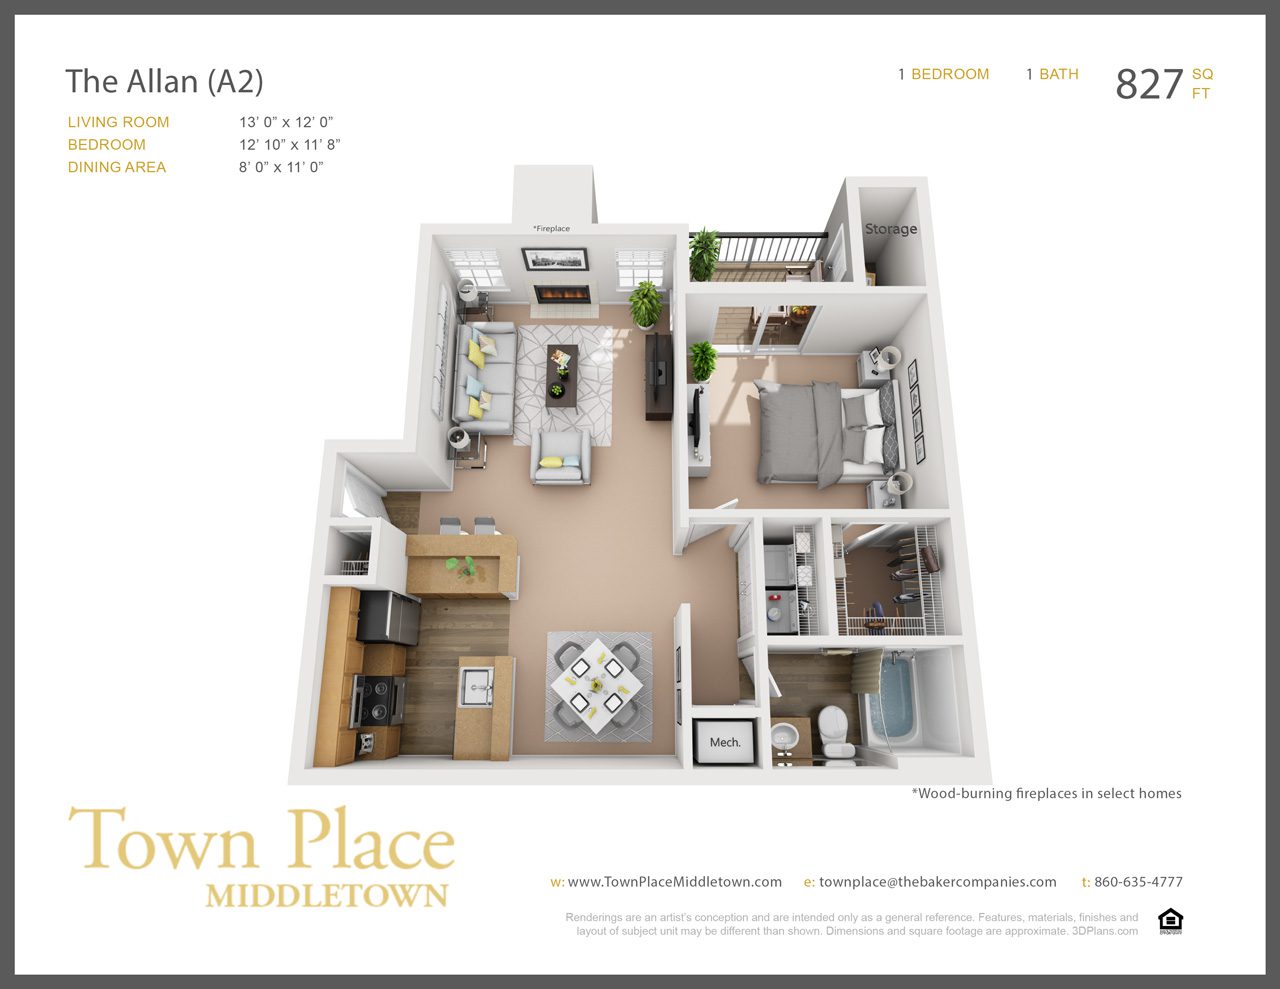 town-place-middletown-the-allan